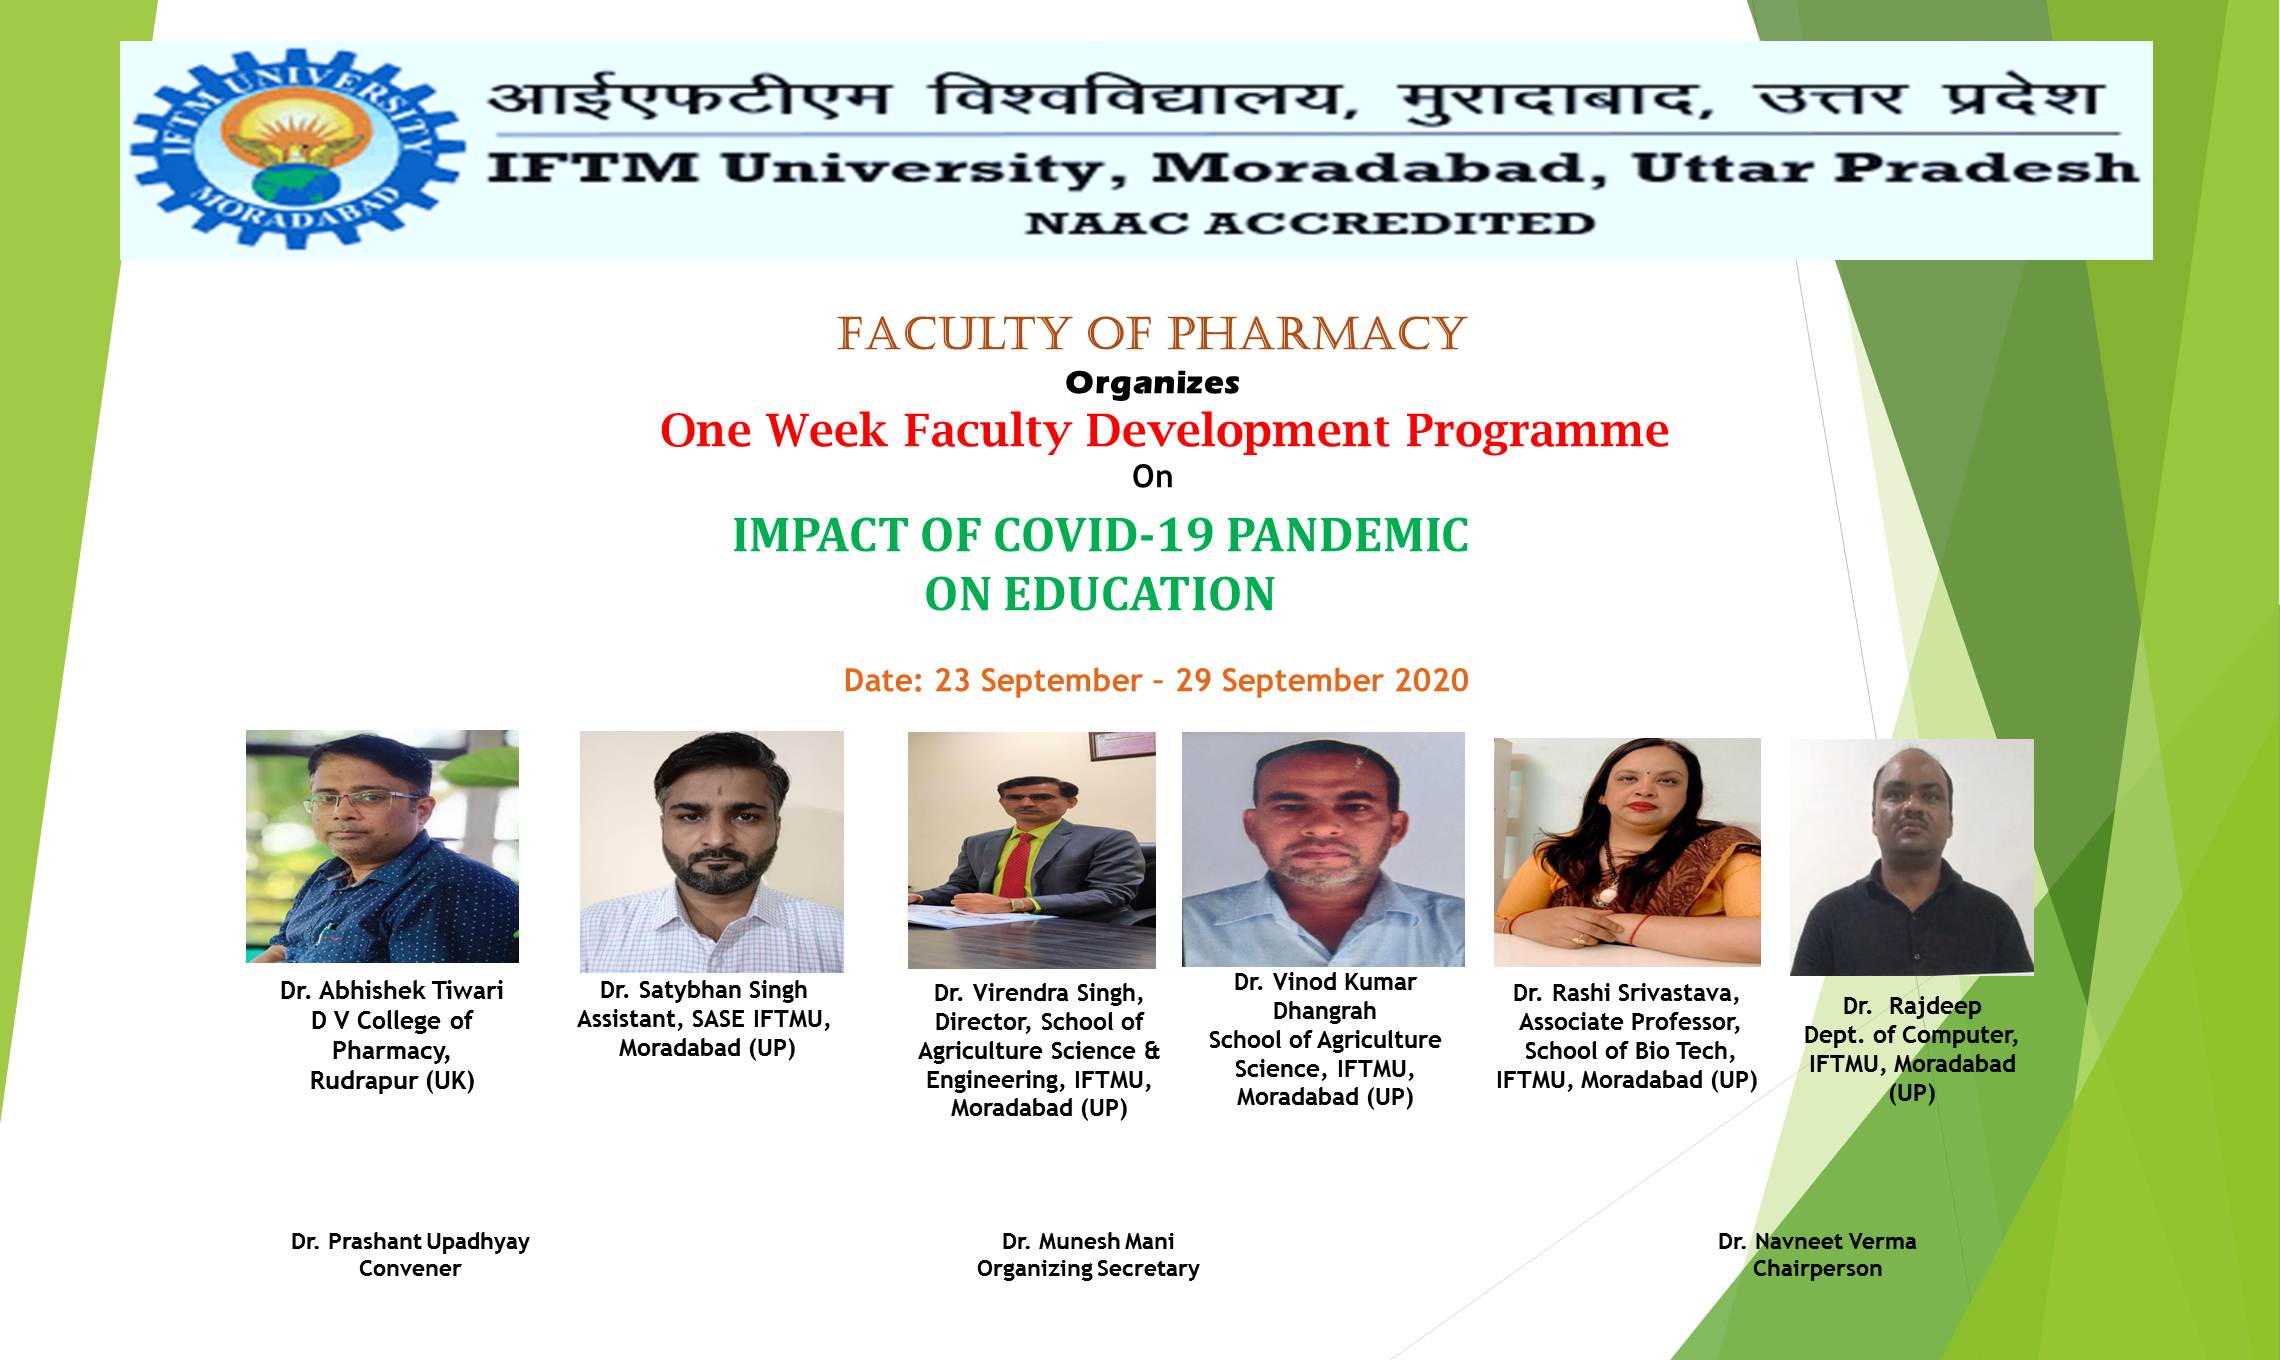 One Week Faculty Development Programme on  Impact of Covid19 Pandemic on Educations